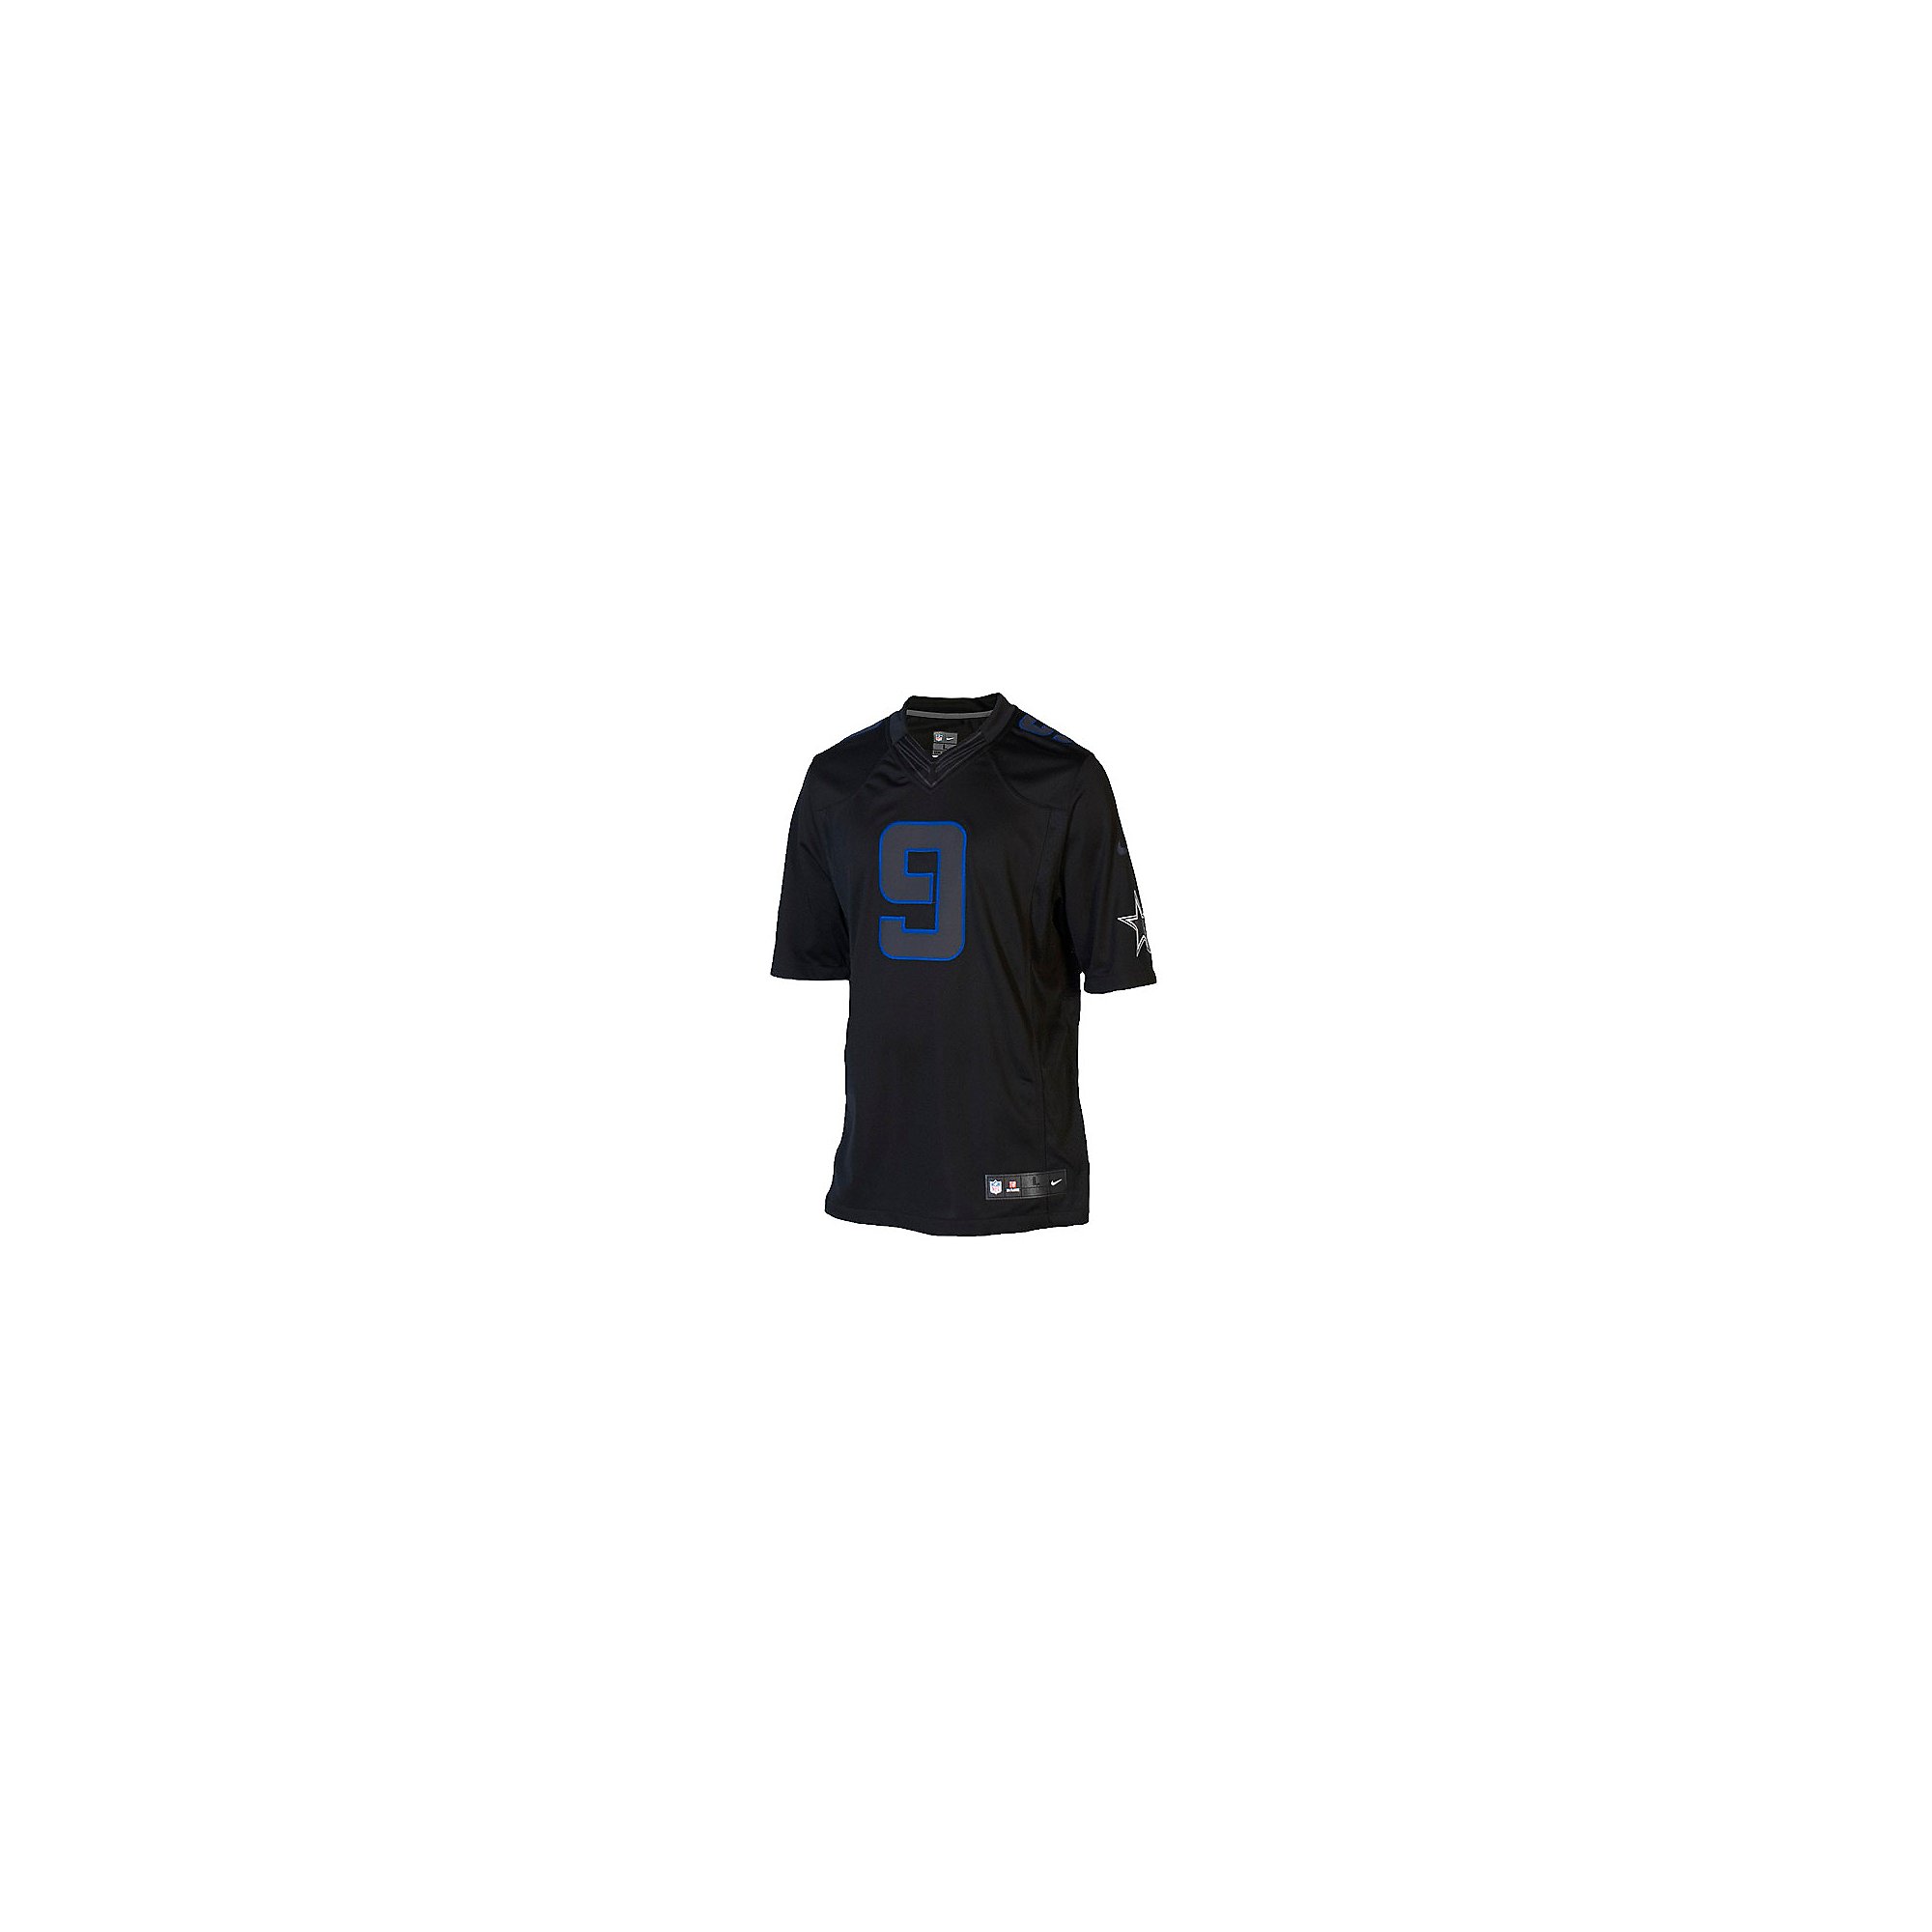 black and blue cowboys jersey